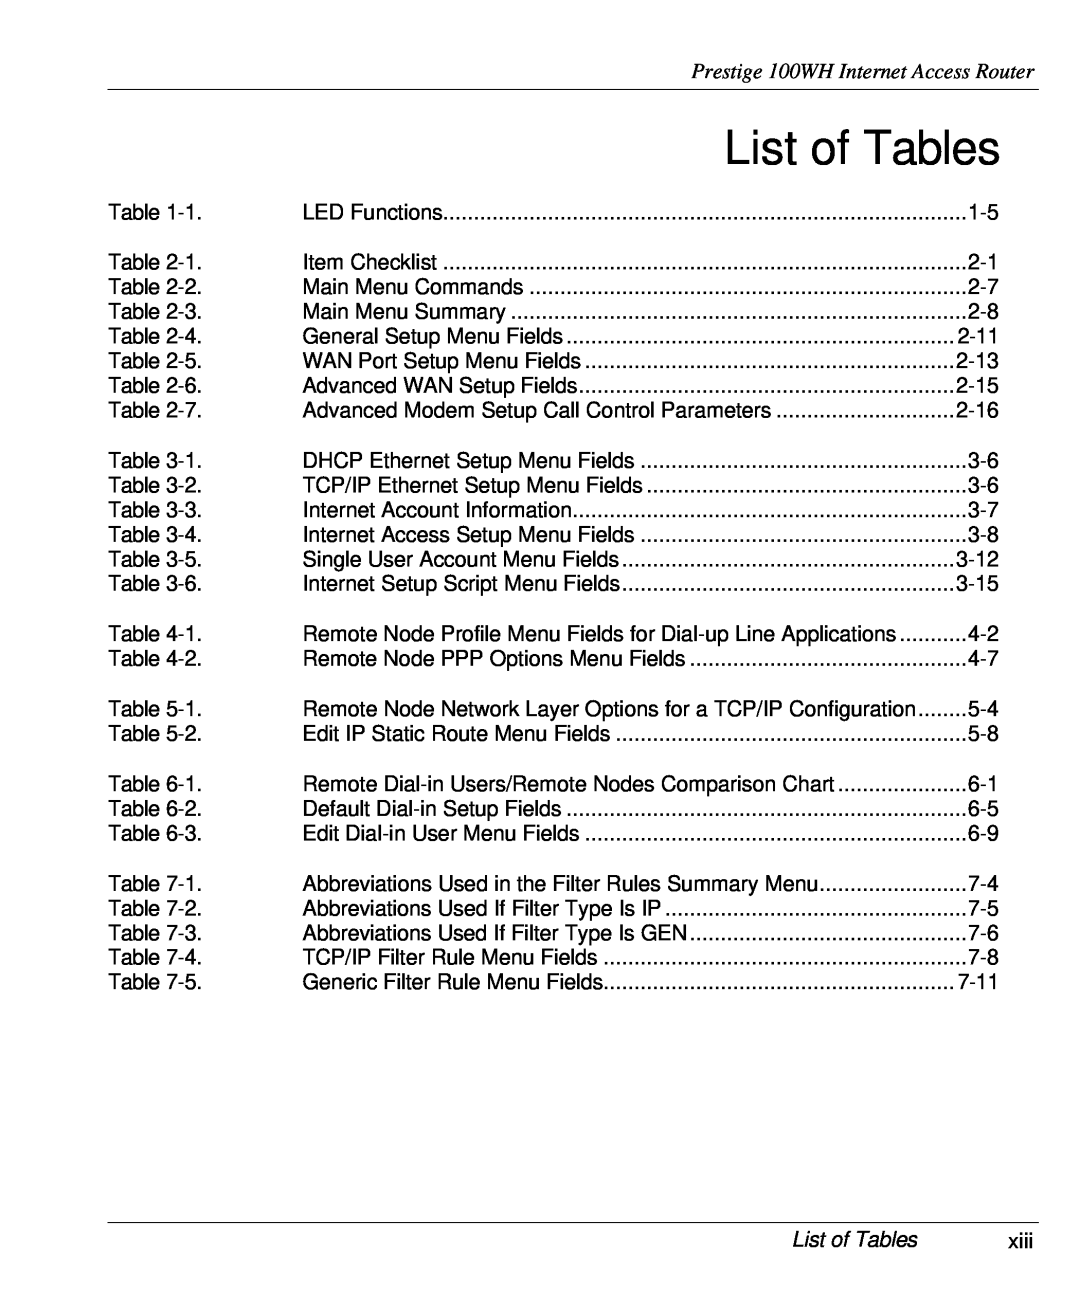 ZyXEL Communications user manual List of Tables, Prestige 100WH Internet Access Router, xiii 